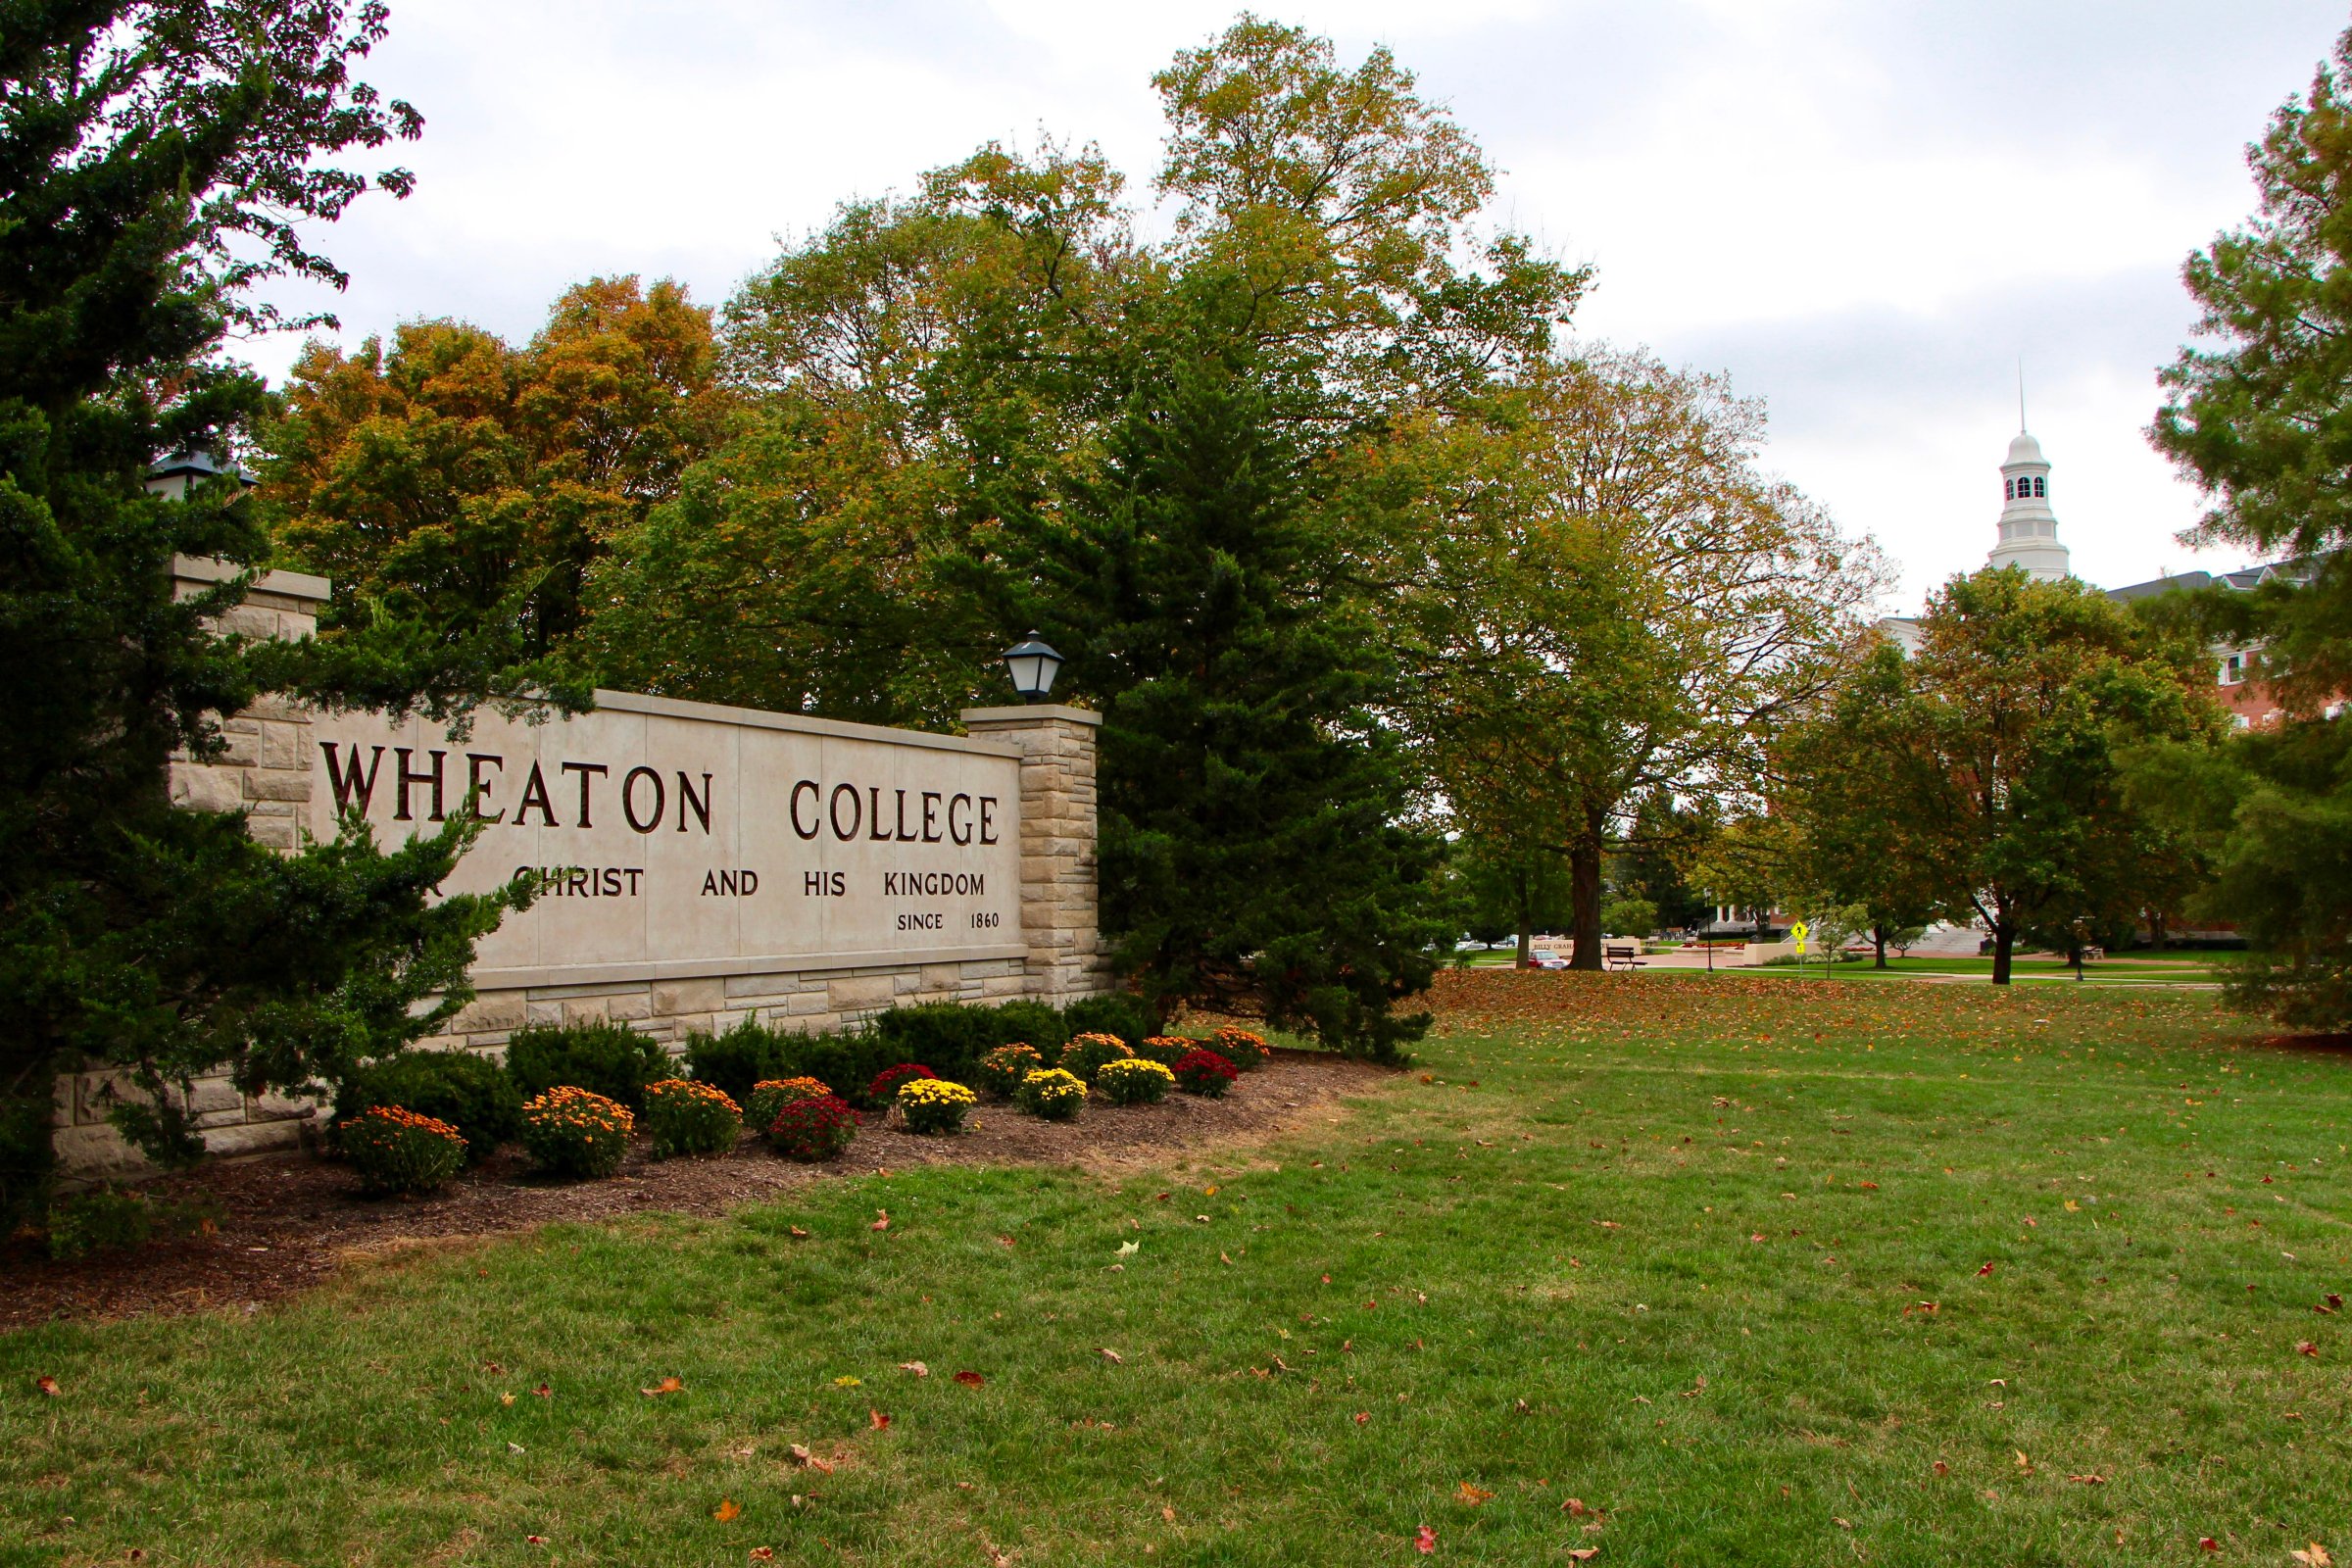 Former student files hazing lawsuit against wheaton college